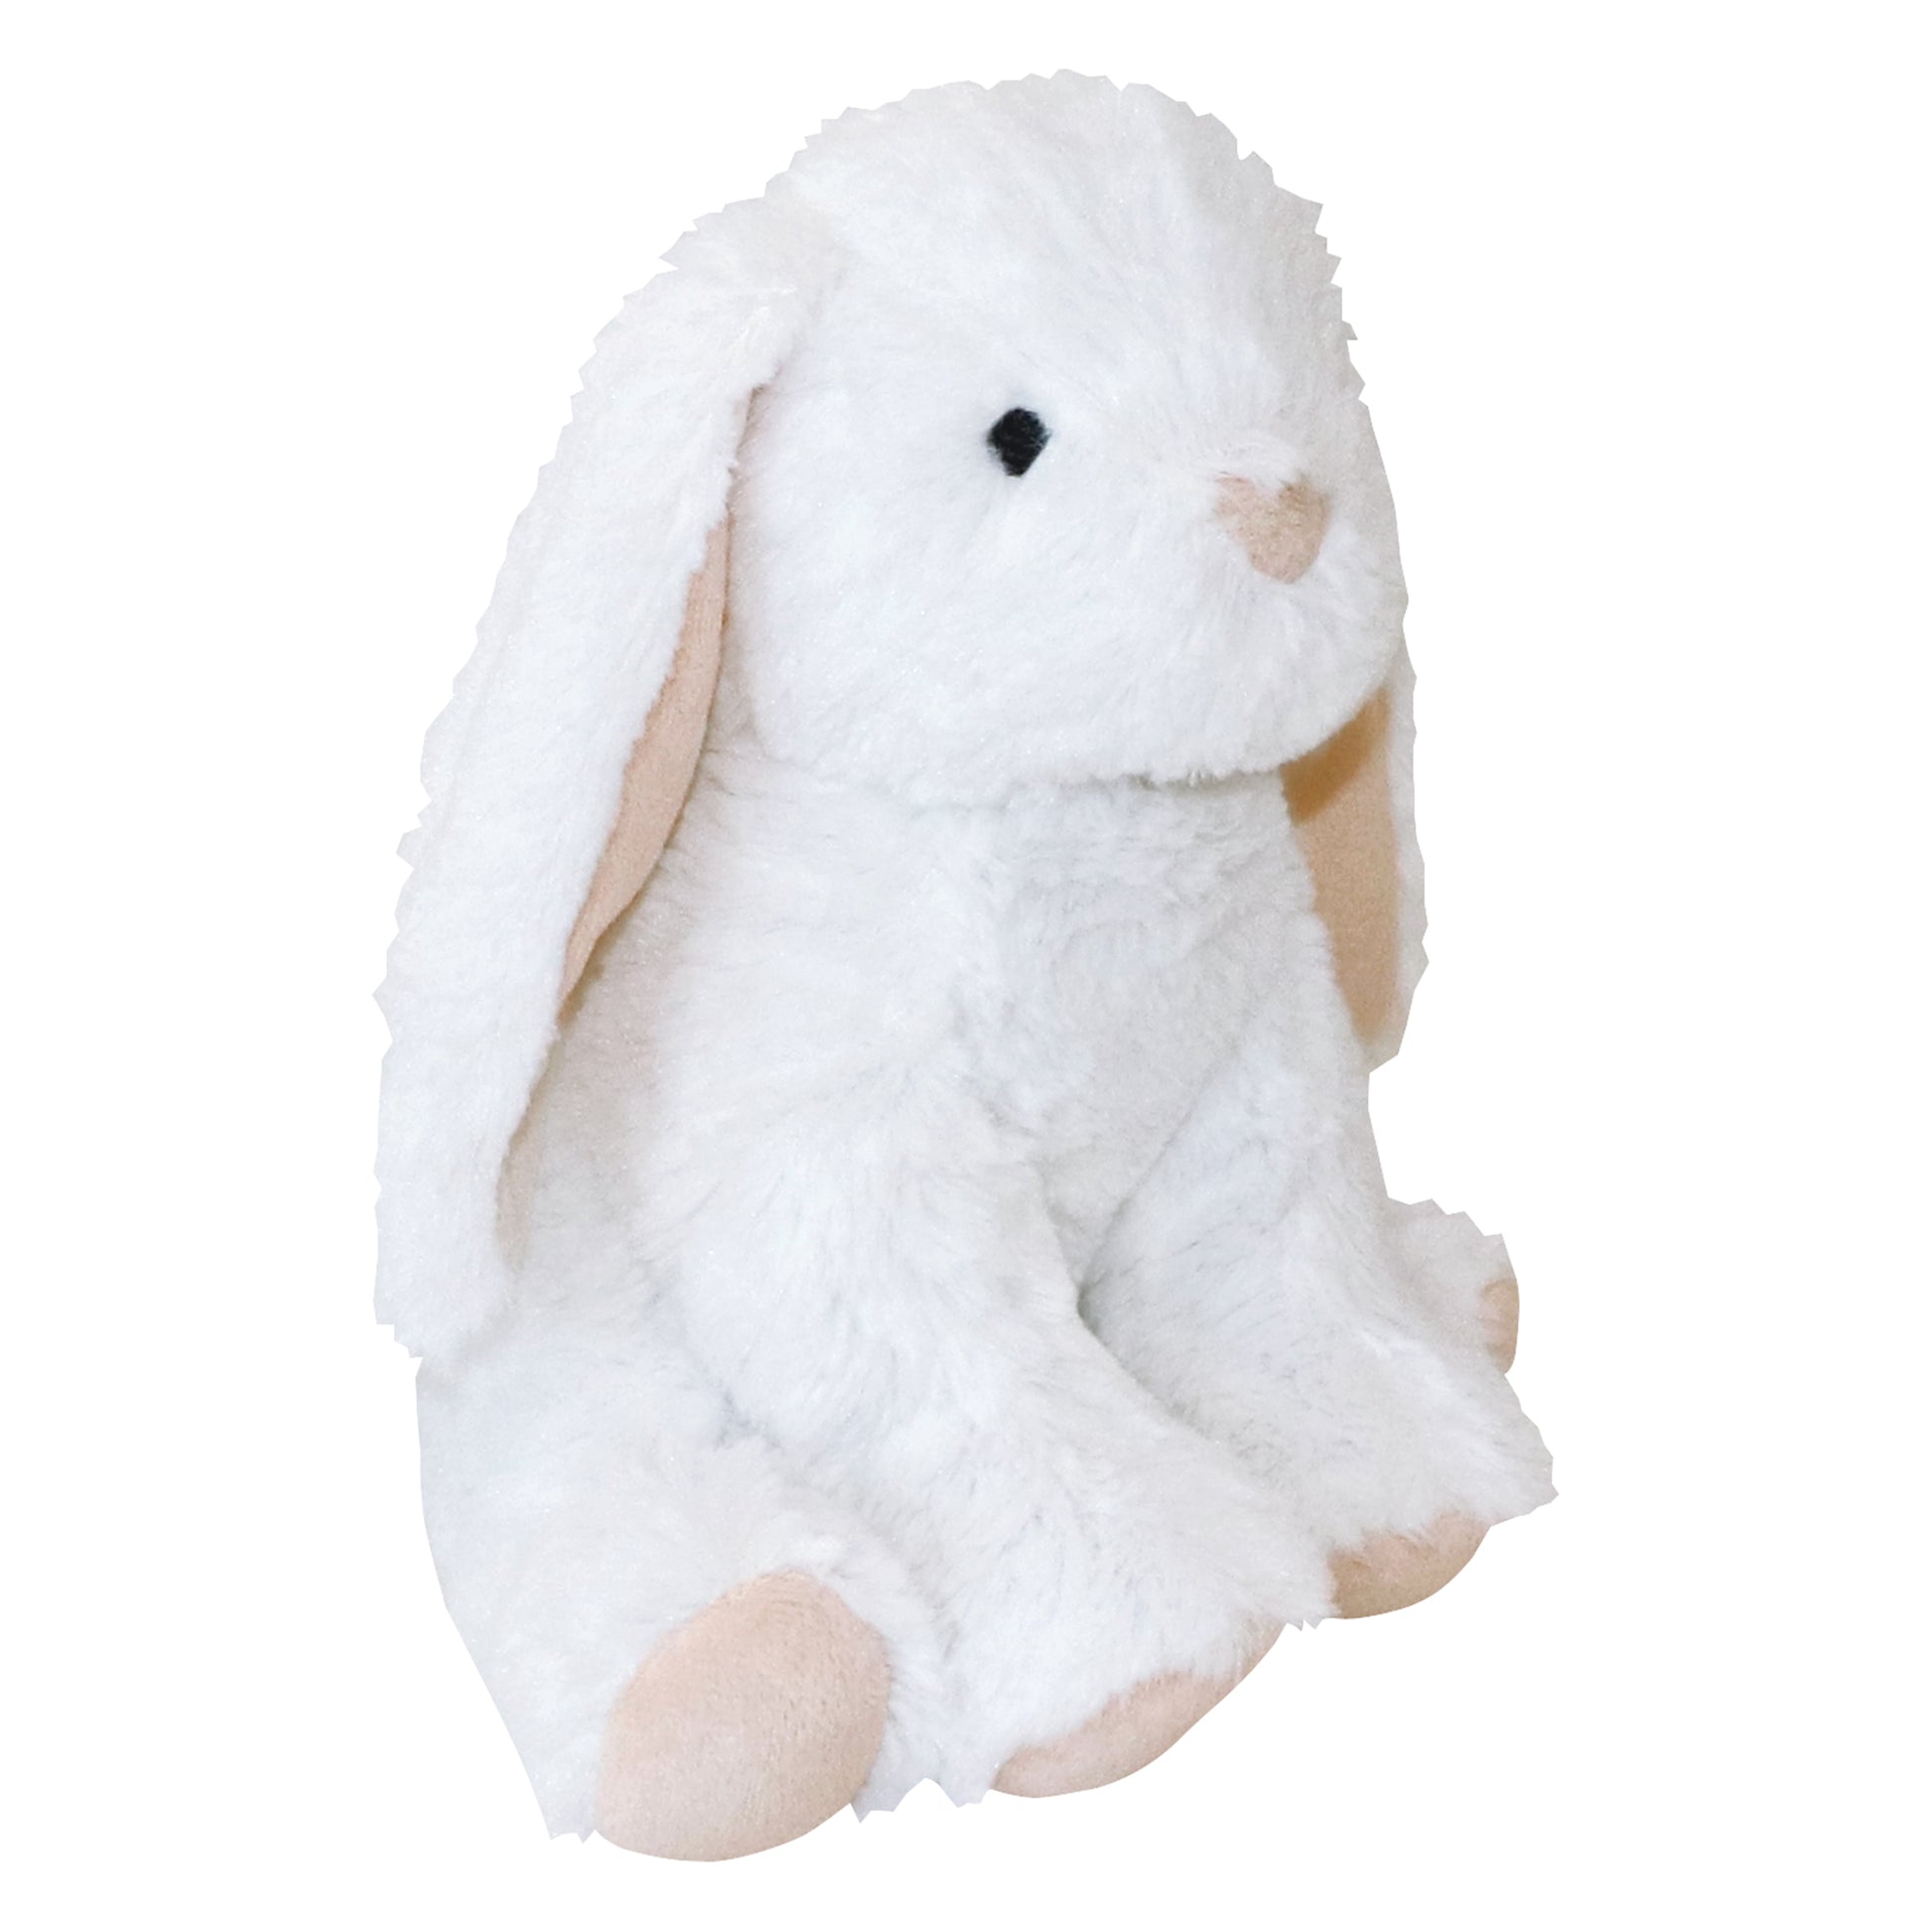 Pink and White Bunny Plush Toy- Angled Image Bunny Toy is made of soft plush fabric in white with pink floppy ears. Measures 9 inches tall.